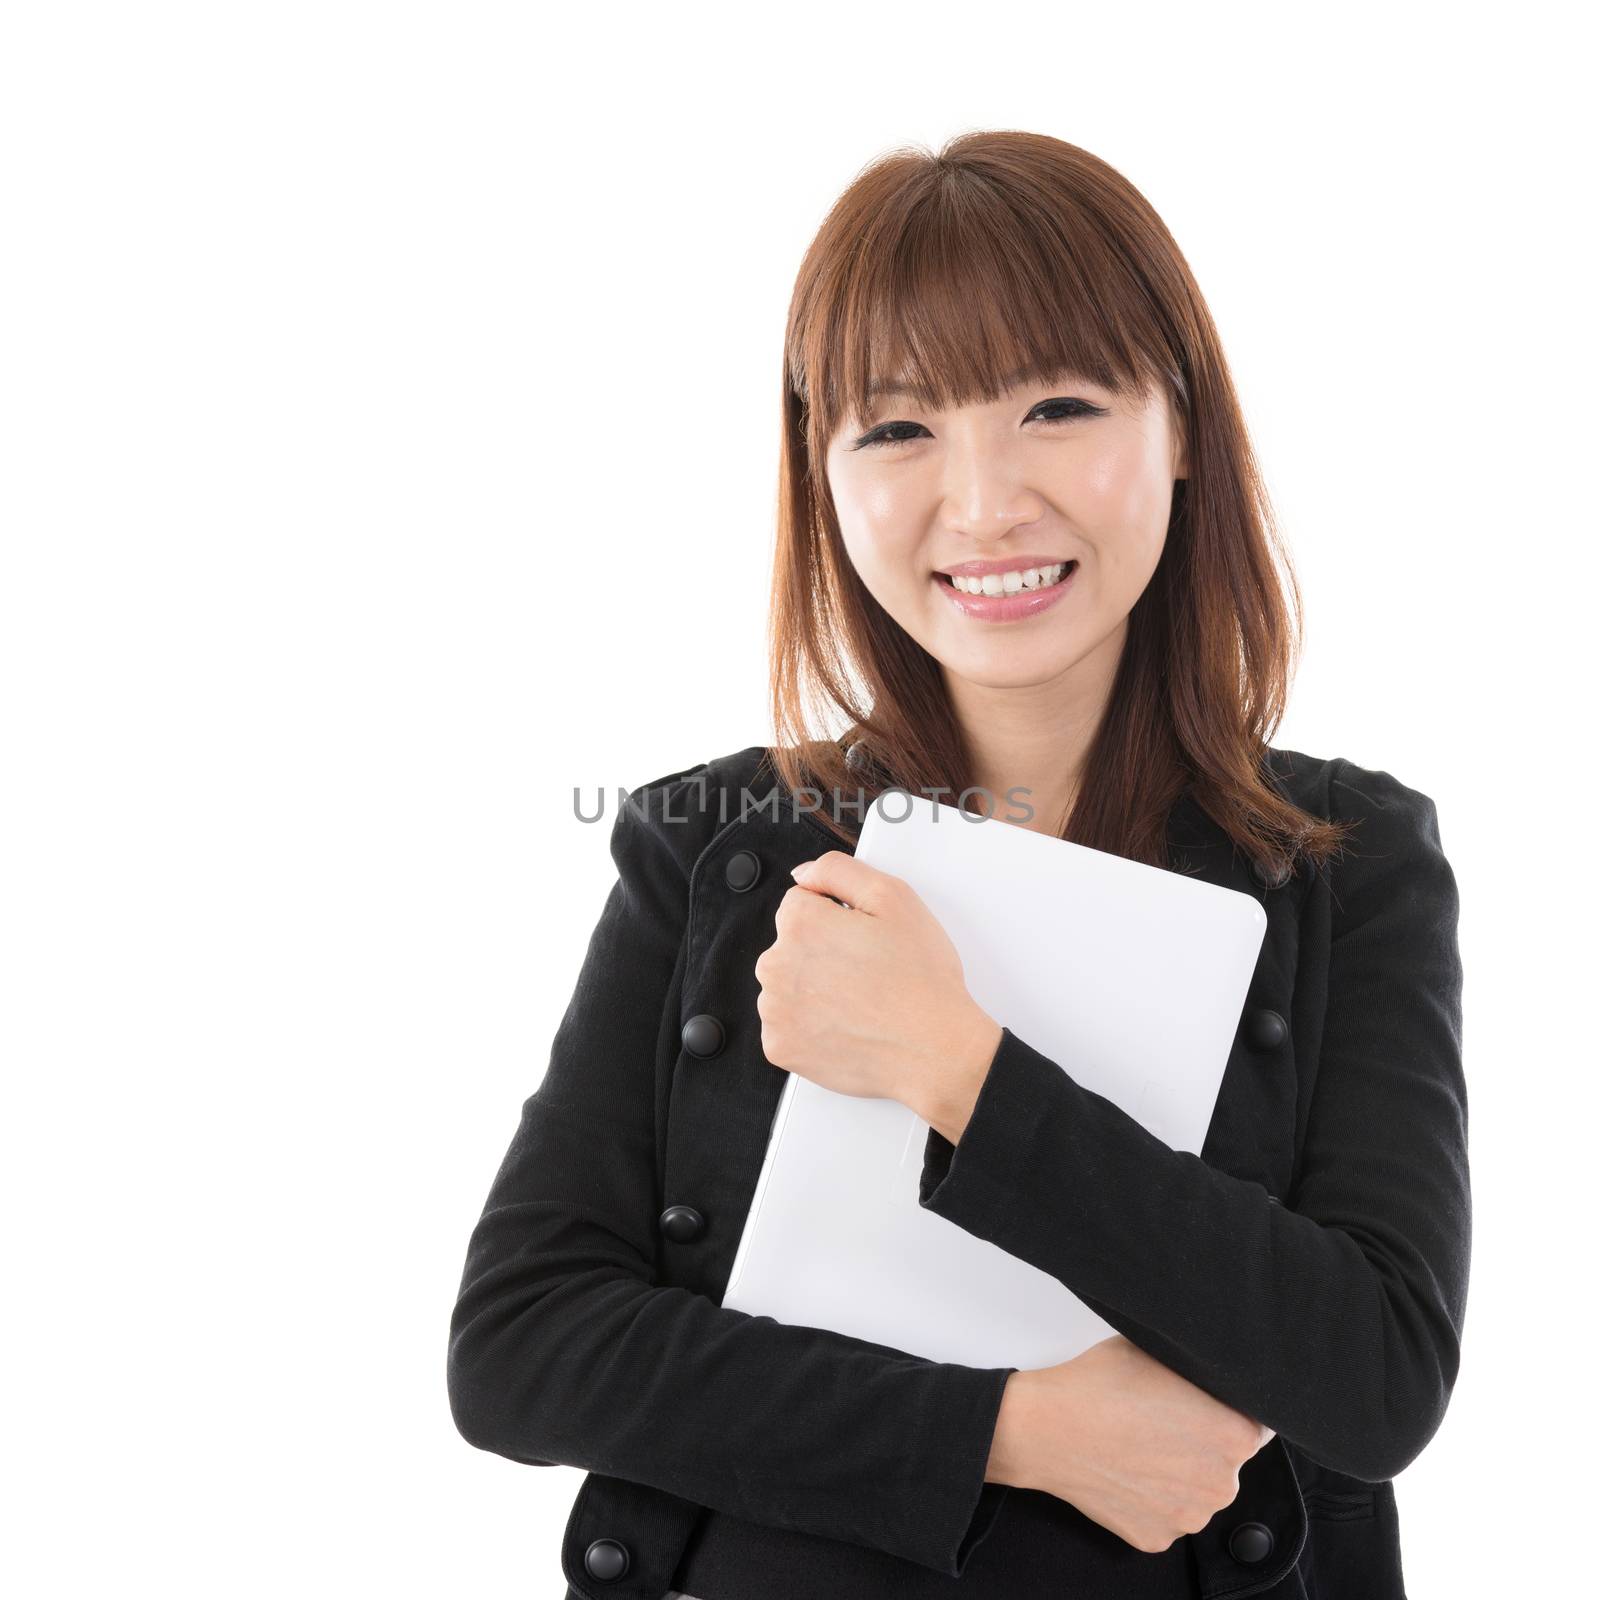 Young Asian woman holding digital computer tablet and smiling, isolated on white background.